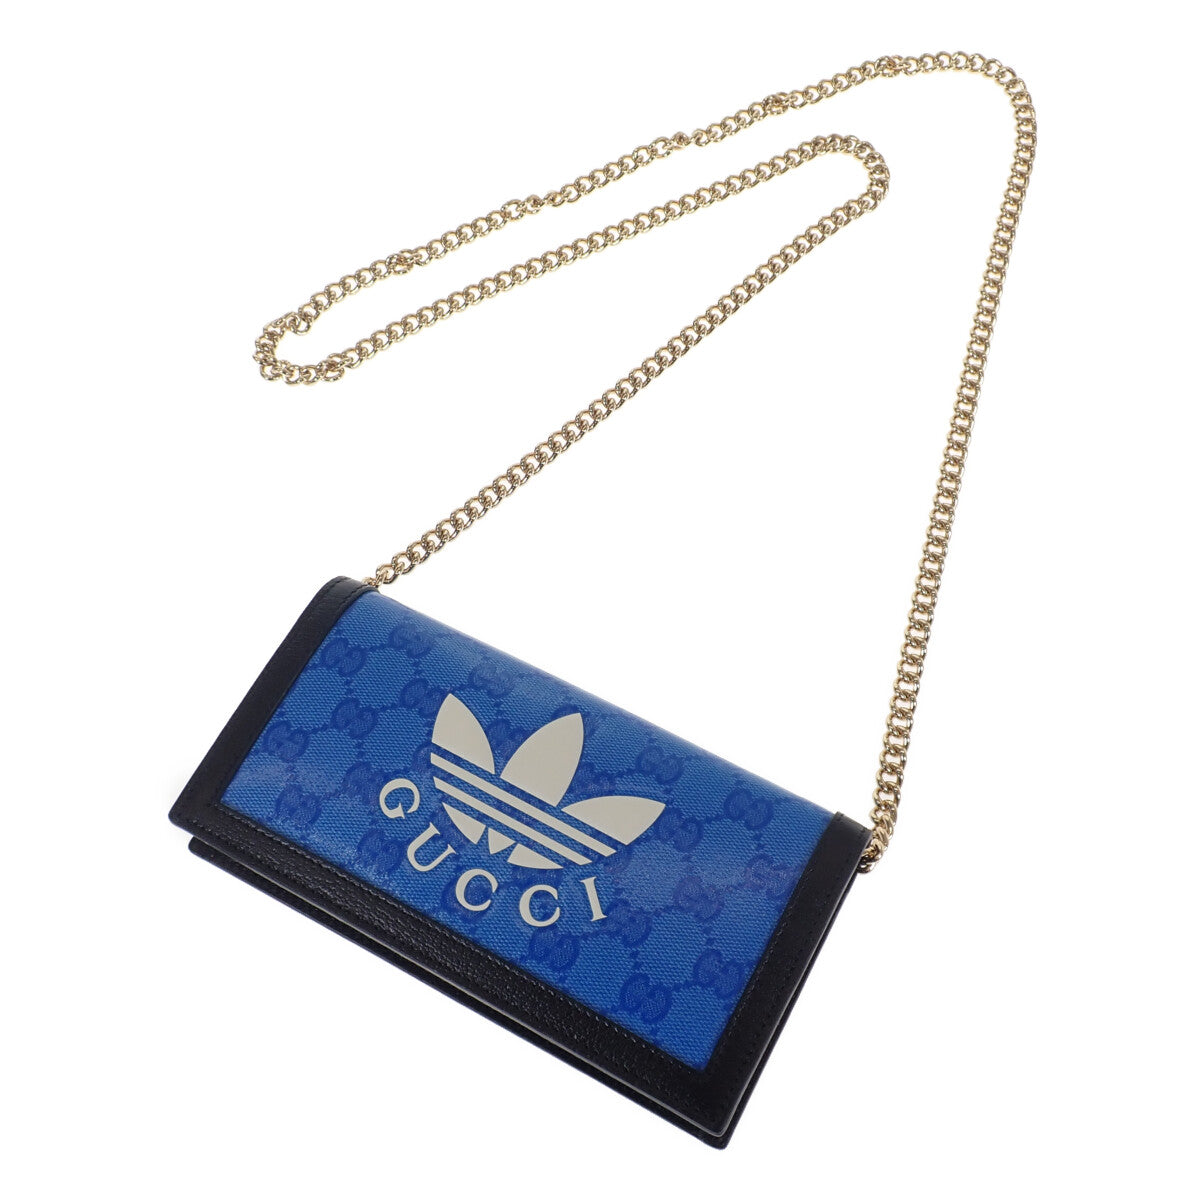 x Adidas Wallet on Chain 621892 UVSCG 4345